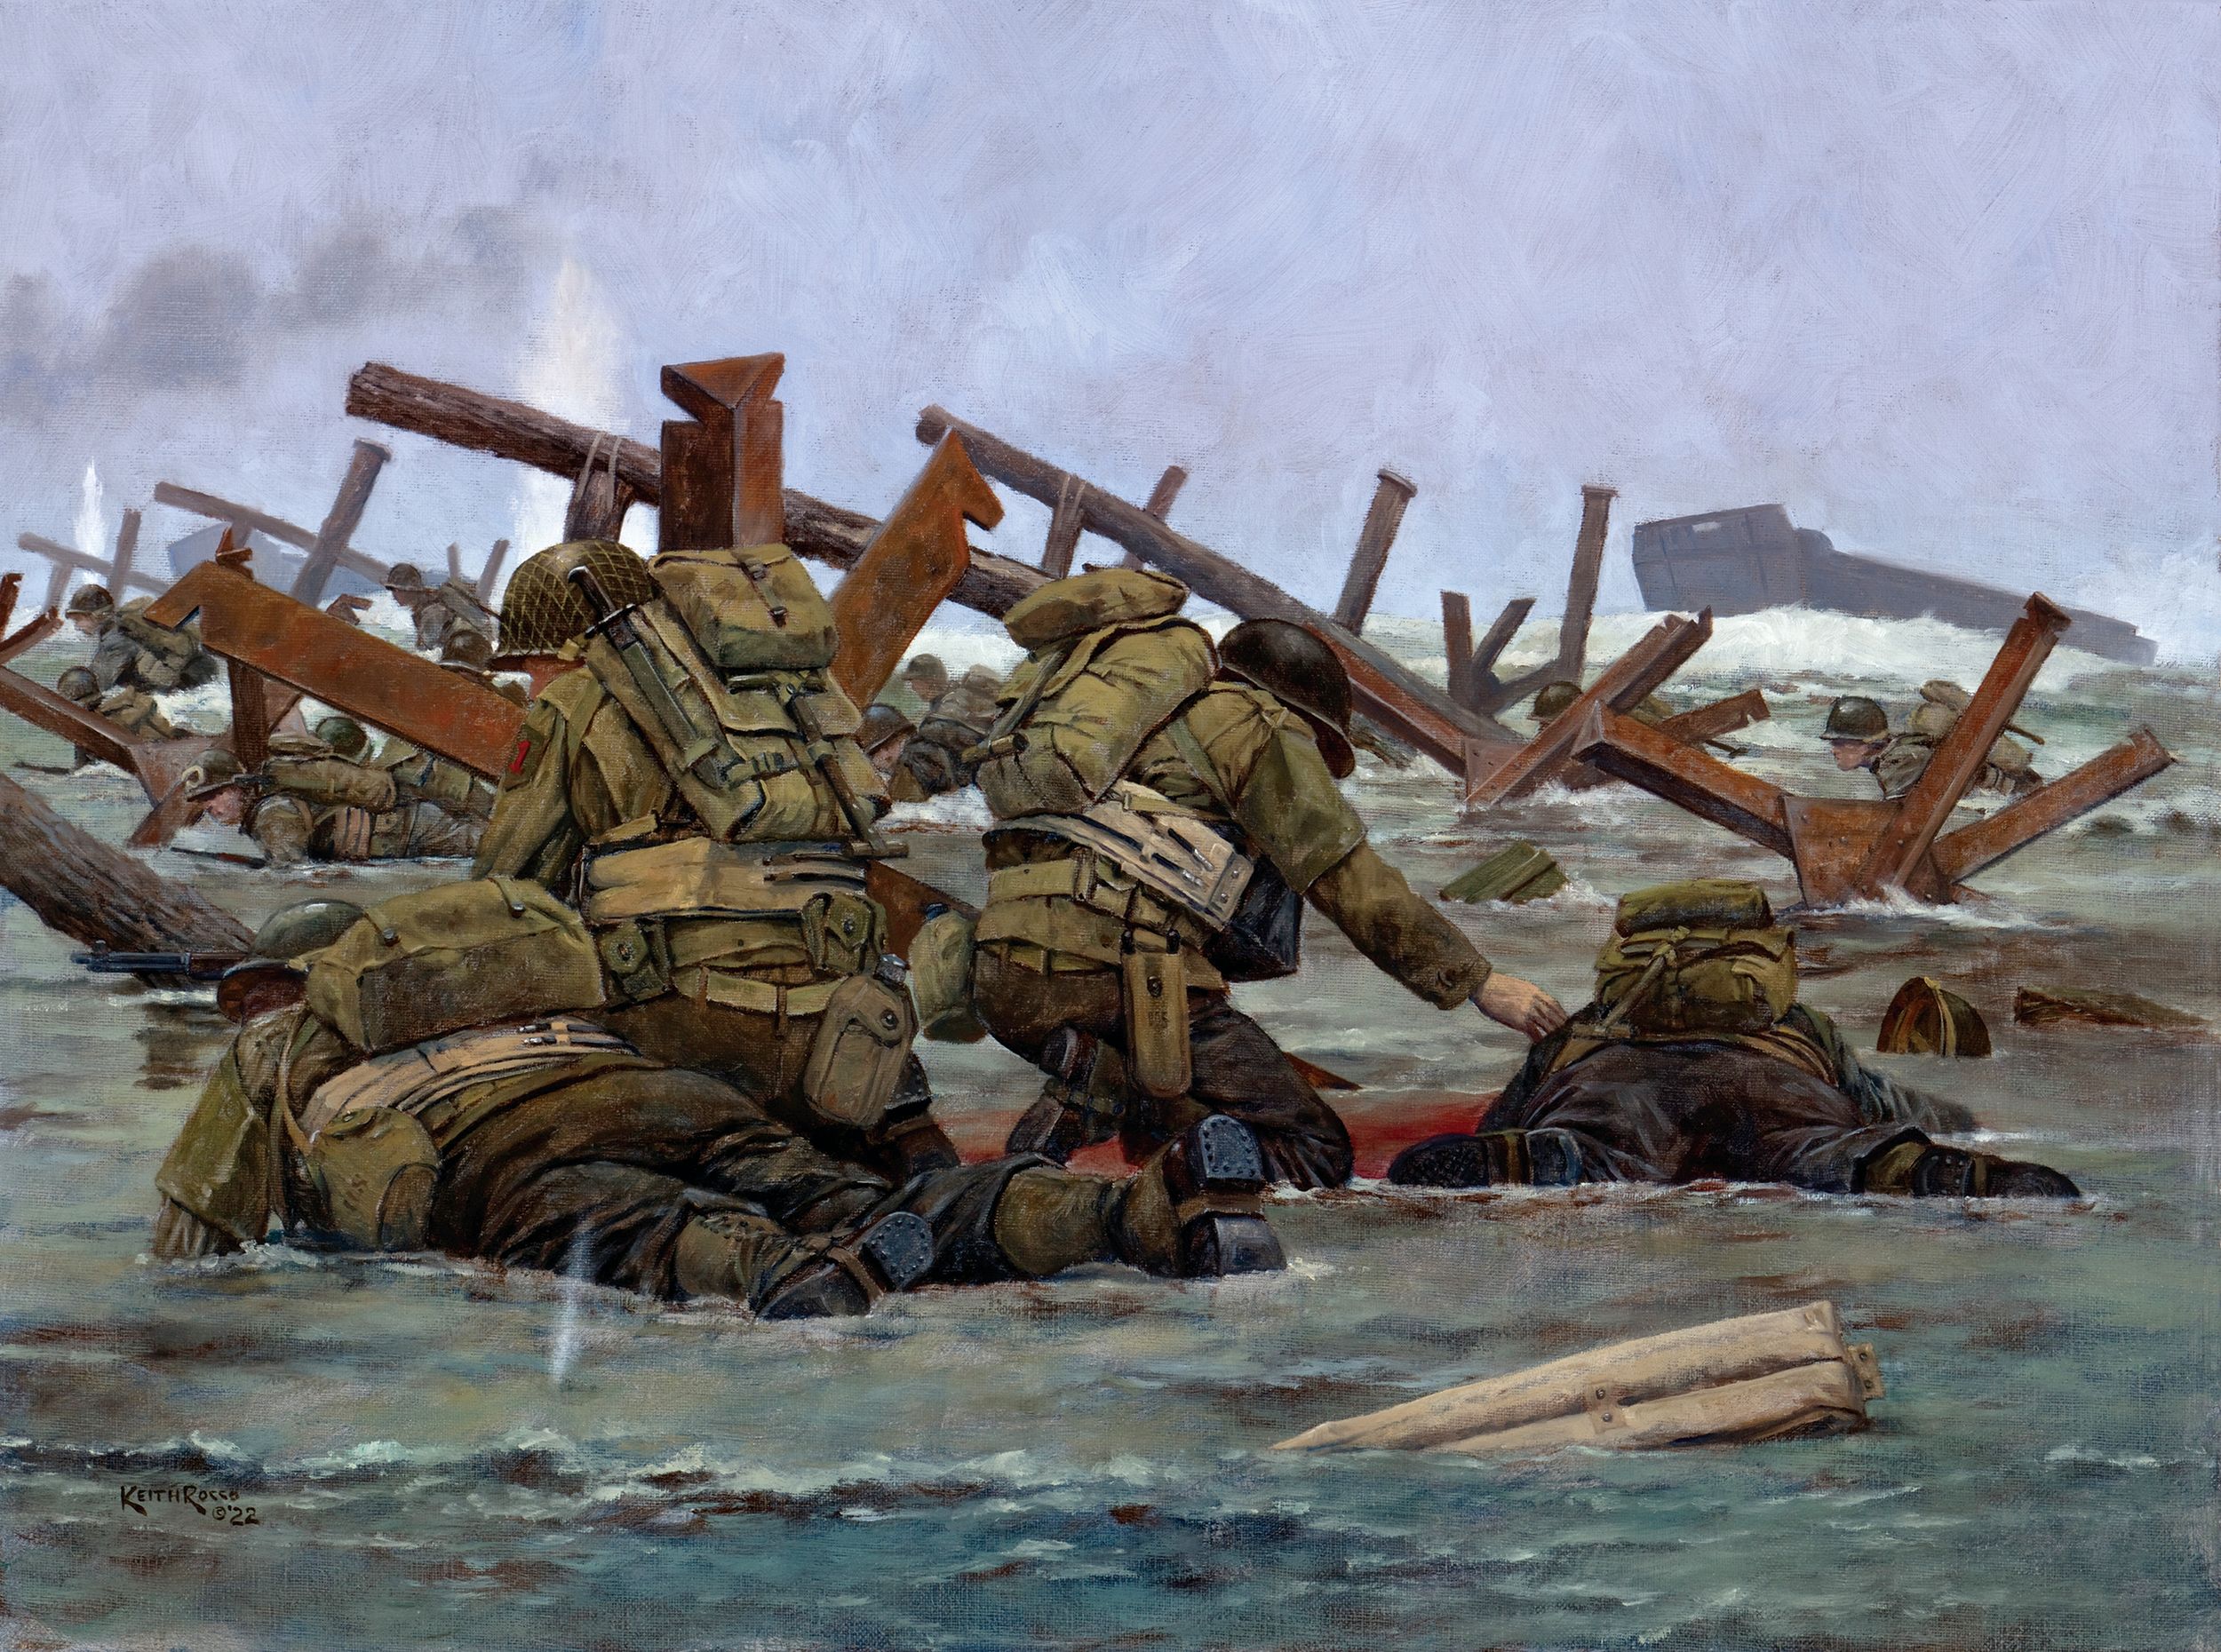 Pinned down by enemy fire, this Keith Rocco painting was inspired by the famous series of Robert Capa photos taken on Easy Red Beach in the early hours of D-Day.